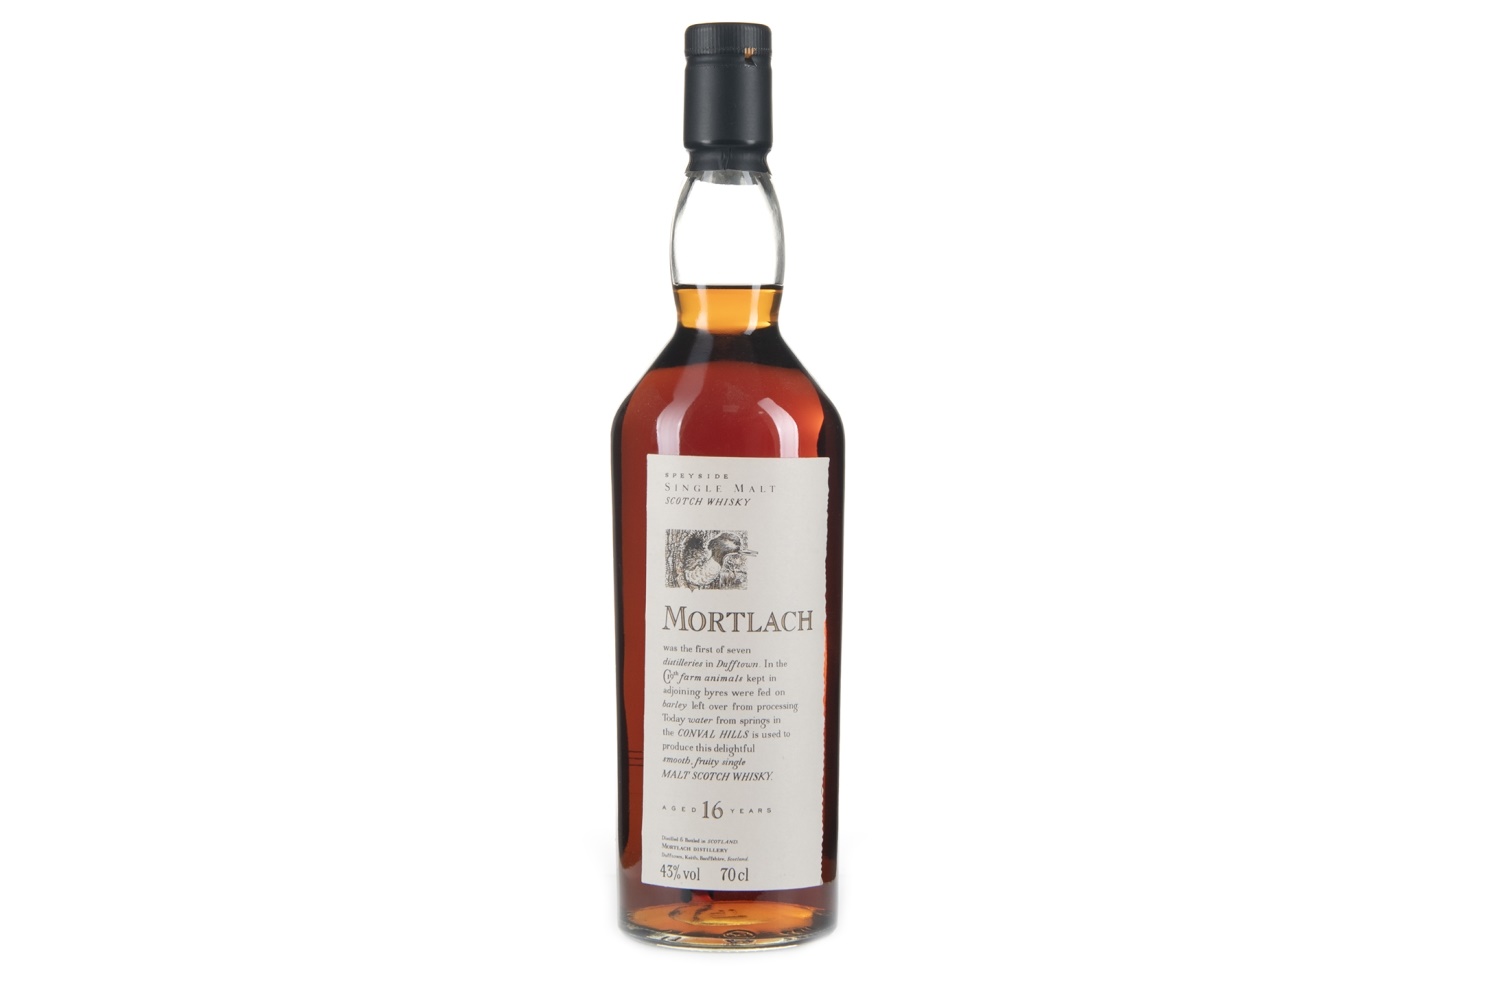 MORTLACH AGED 16 YEARS FLORA & FAUNA - Image 2 of 2